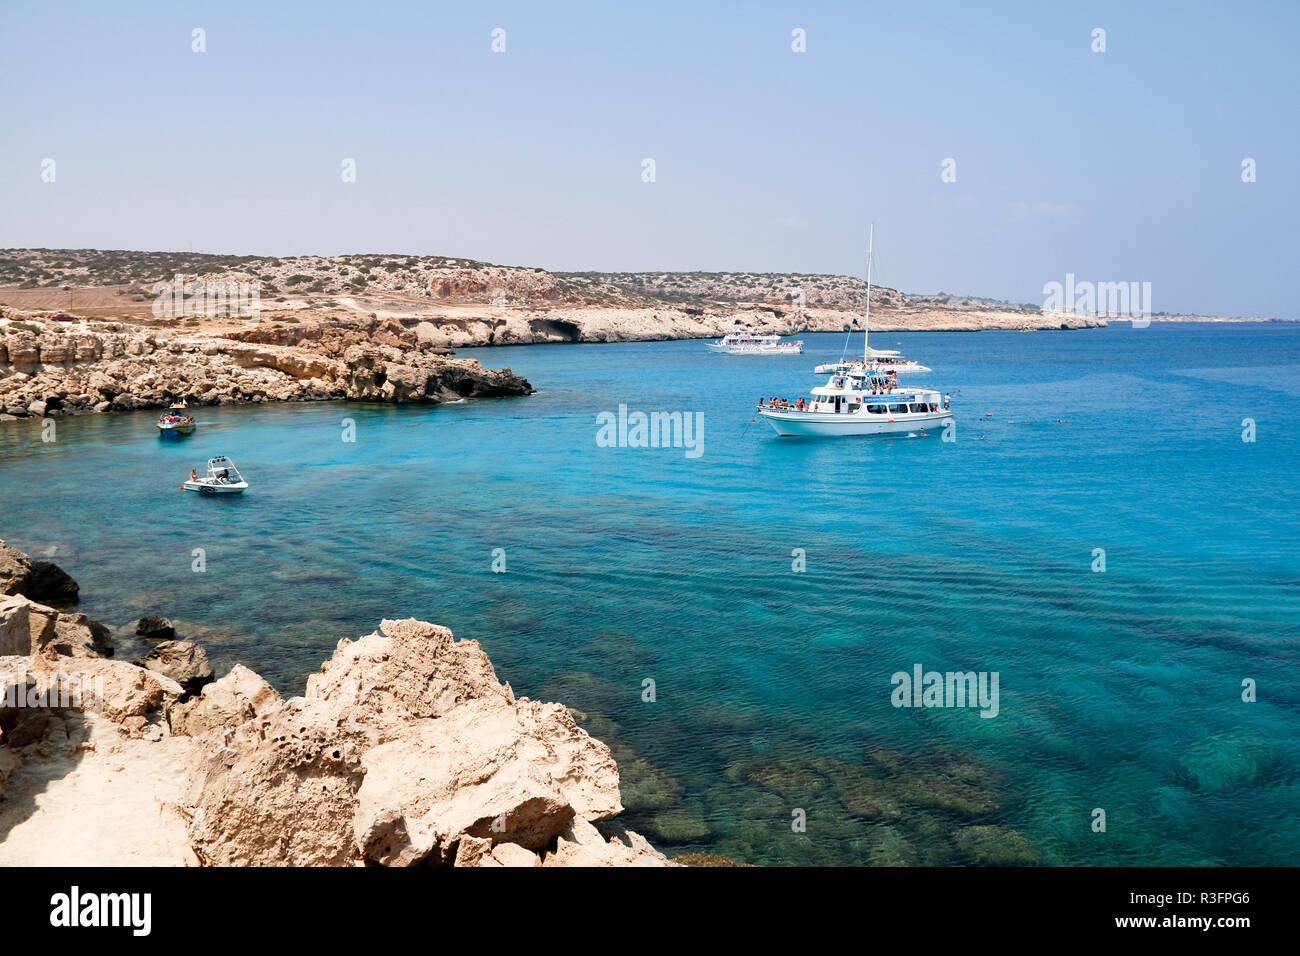 Pleasure boats exploring the clear blue waters at Cape Greco, Ayia Napa, Cyprus Stock Photo